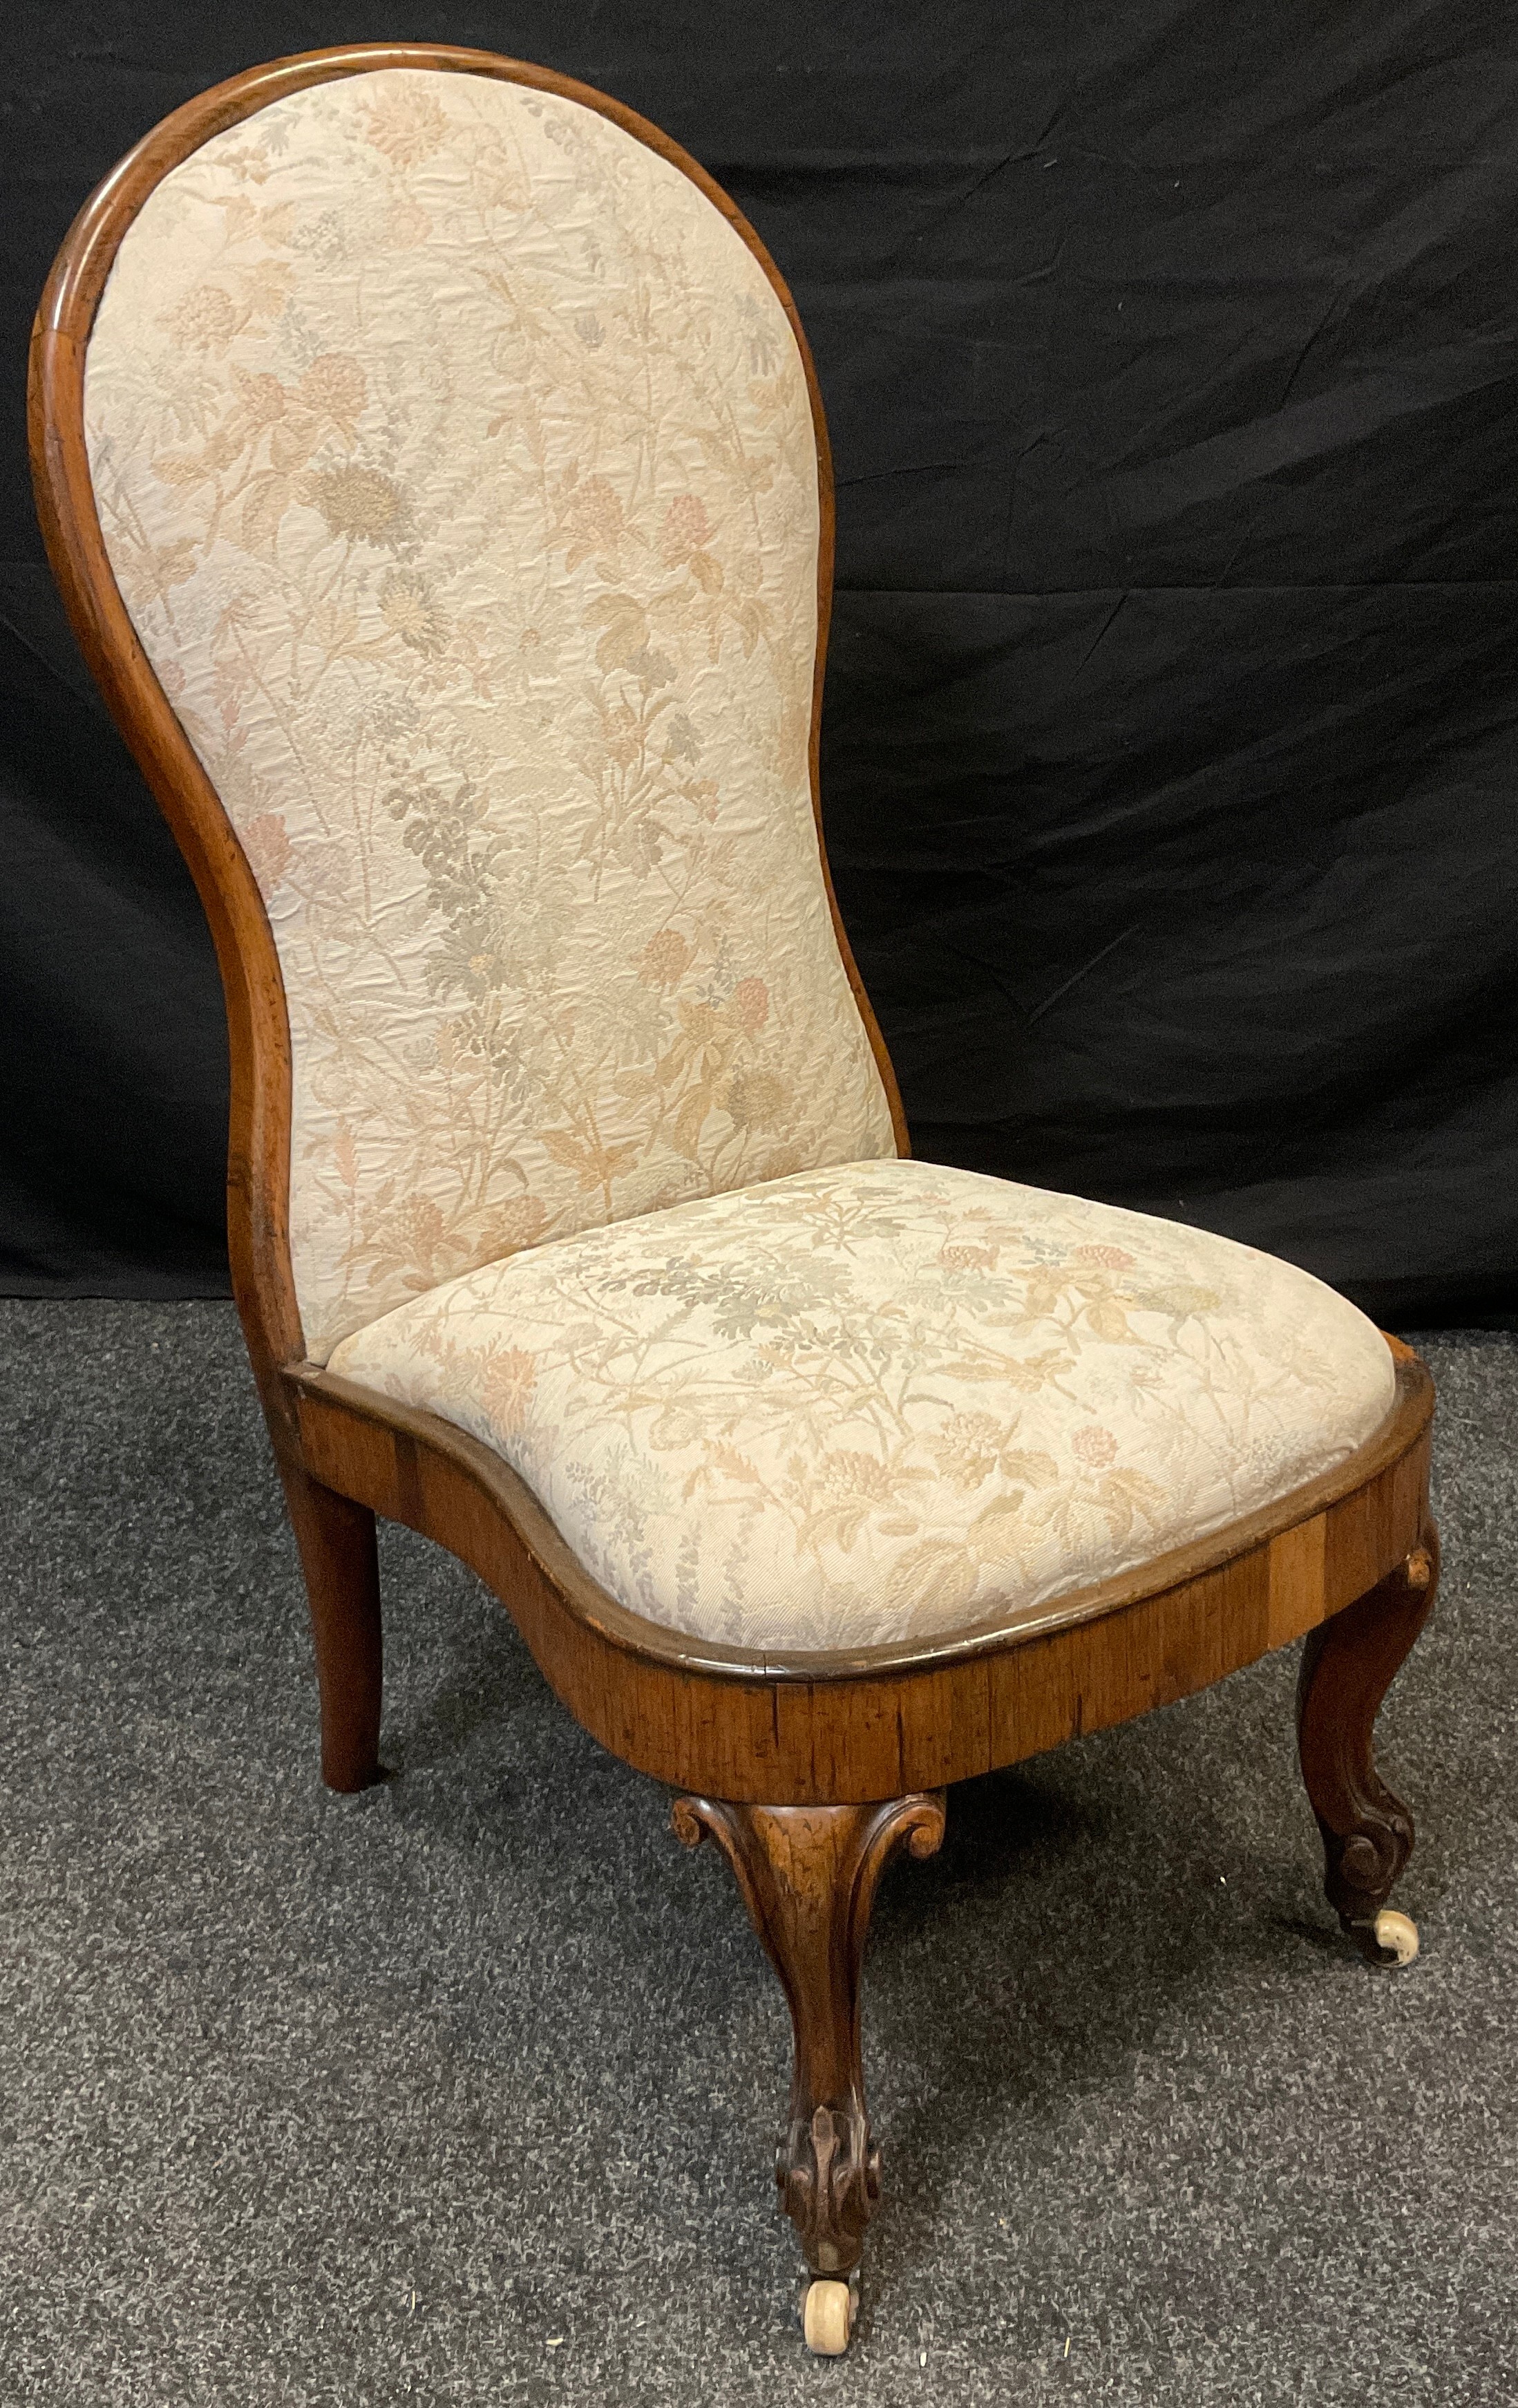 A Victorian rosewood nursing chair, carved cabriole legs, ceramic casters, 95cm high, c.1870.